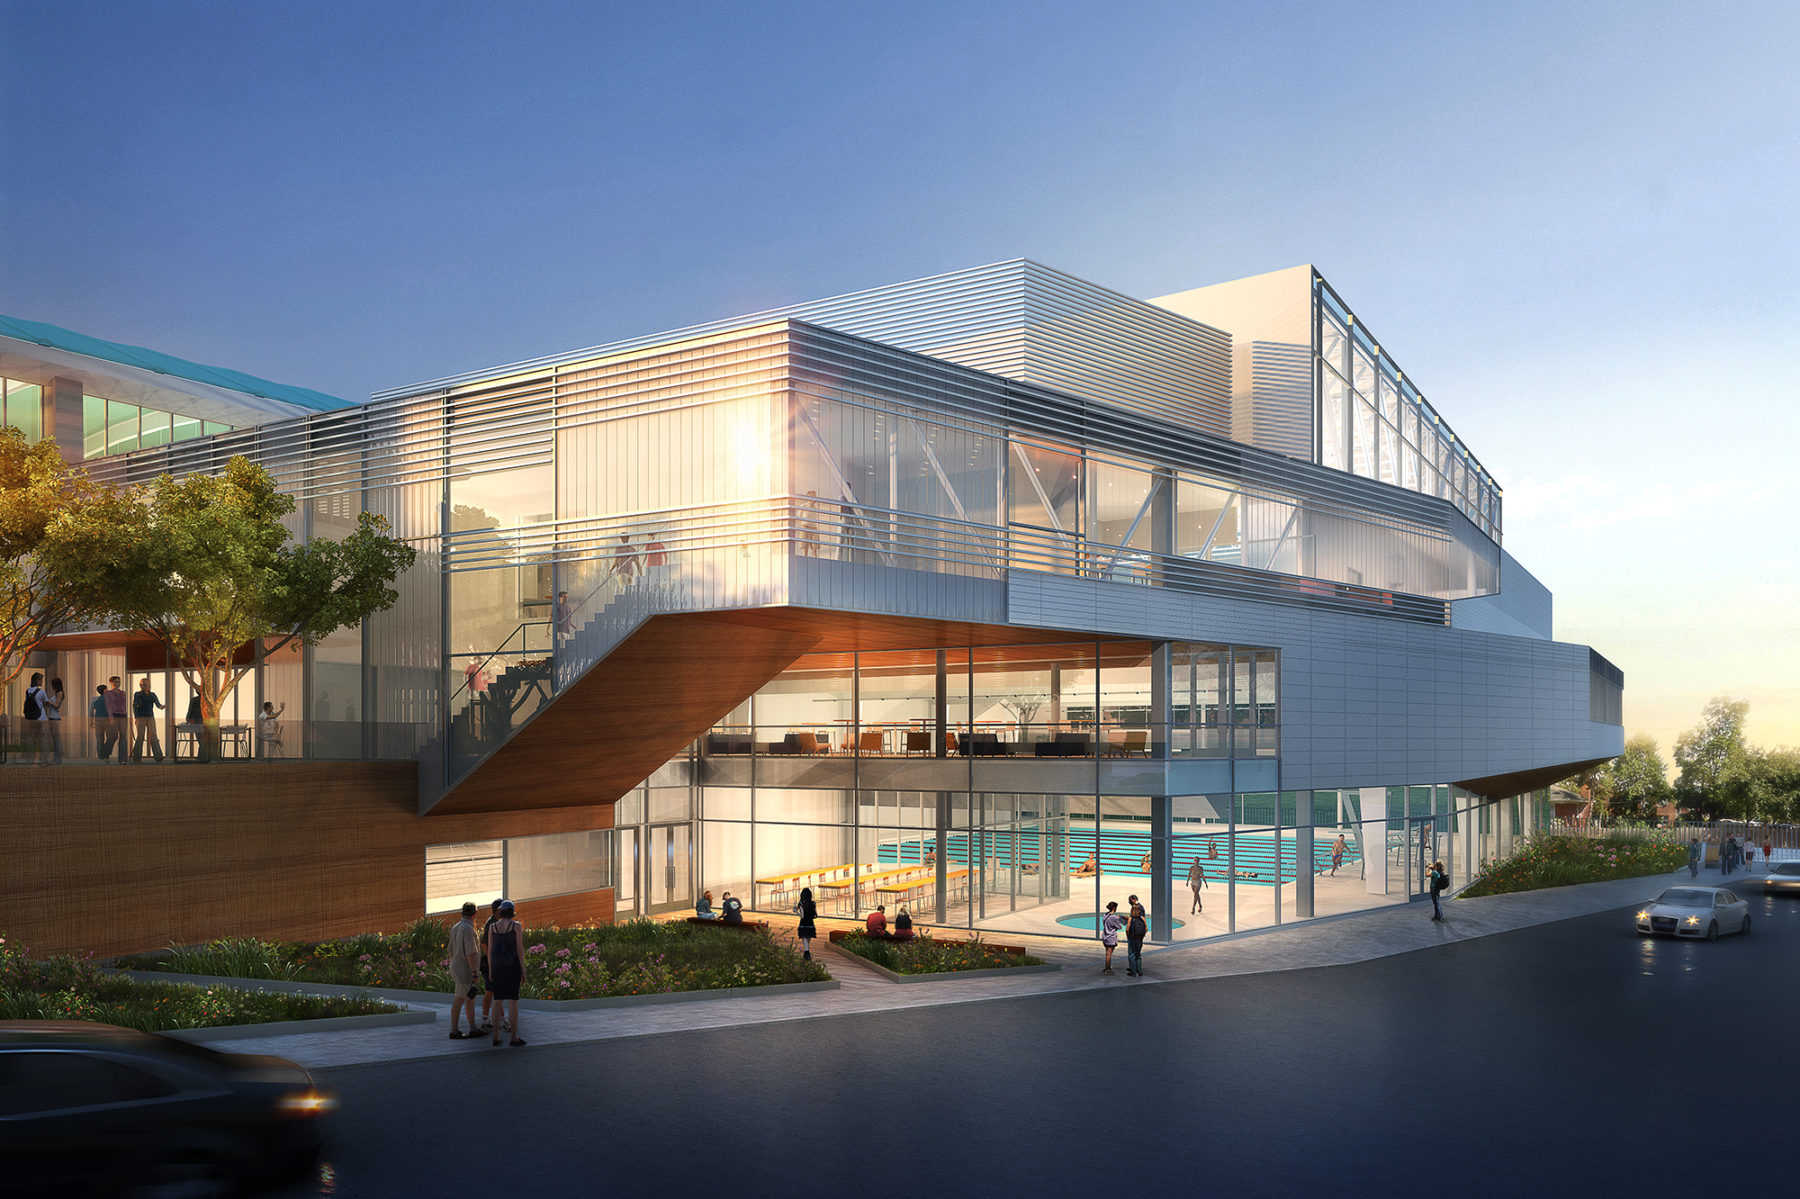 Exterior rendering of the gym illuminated at dusk